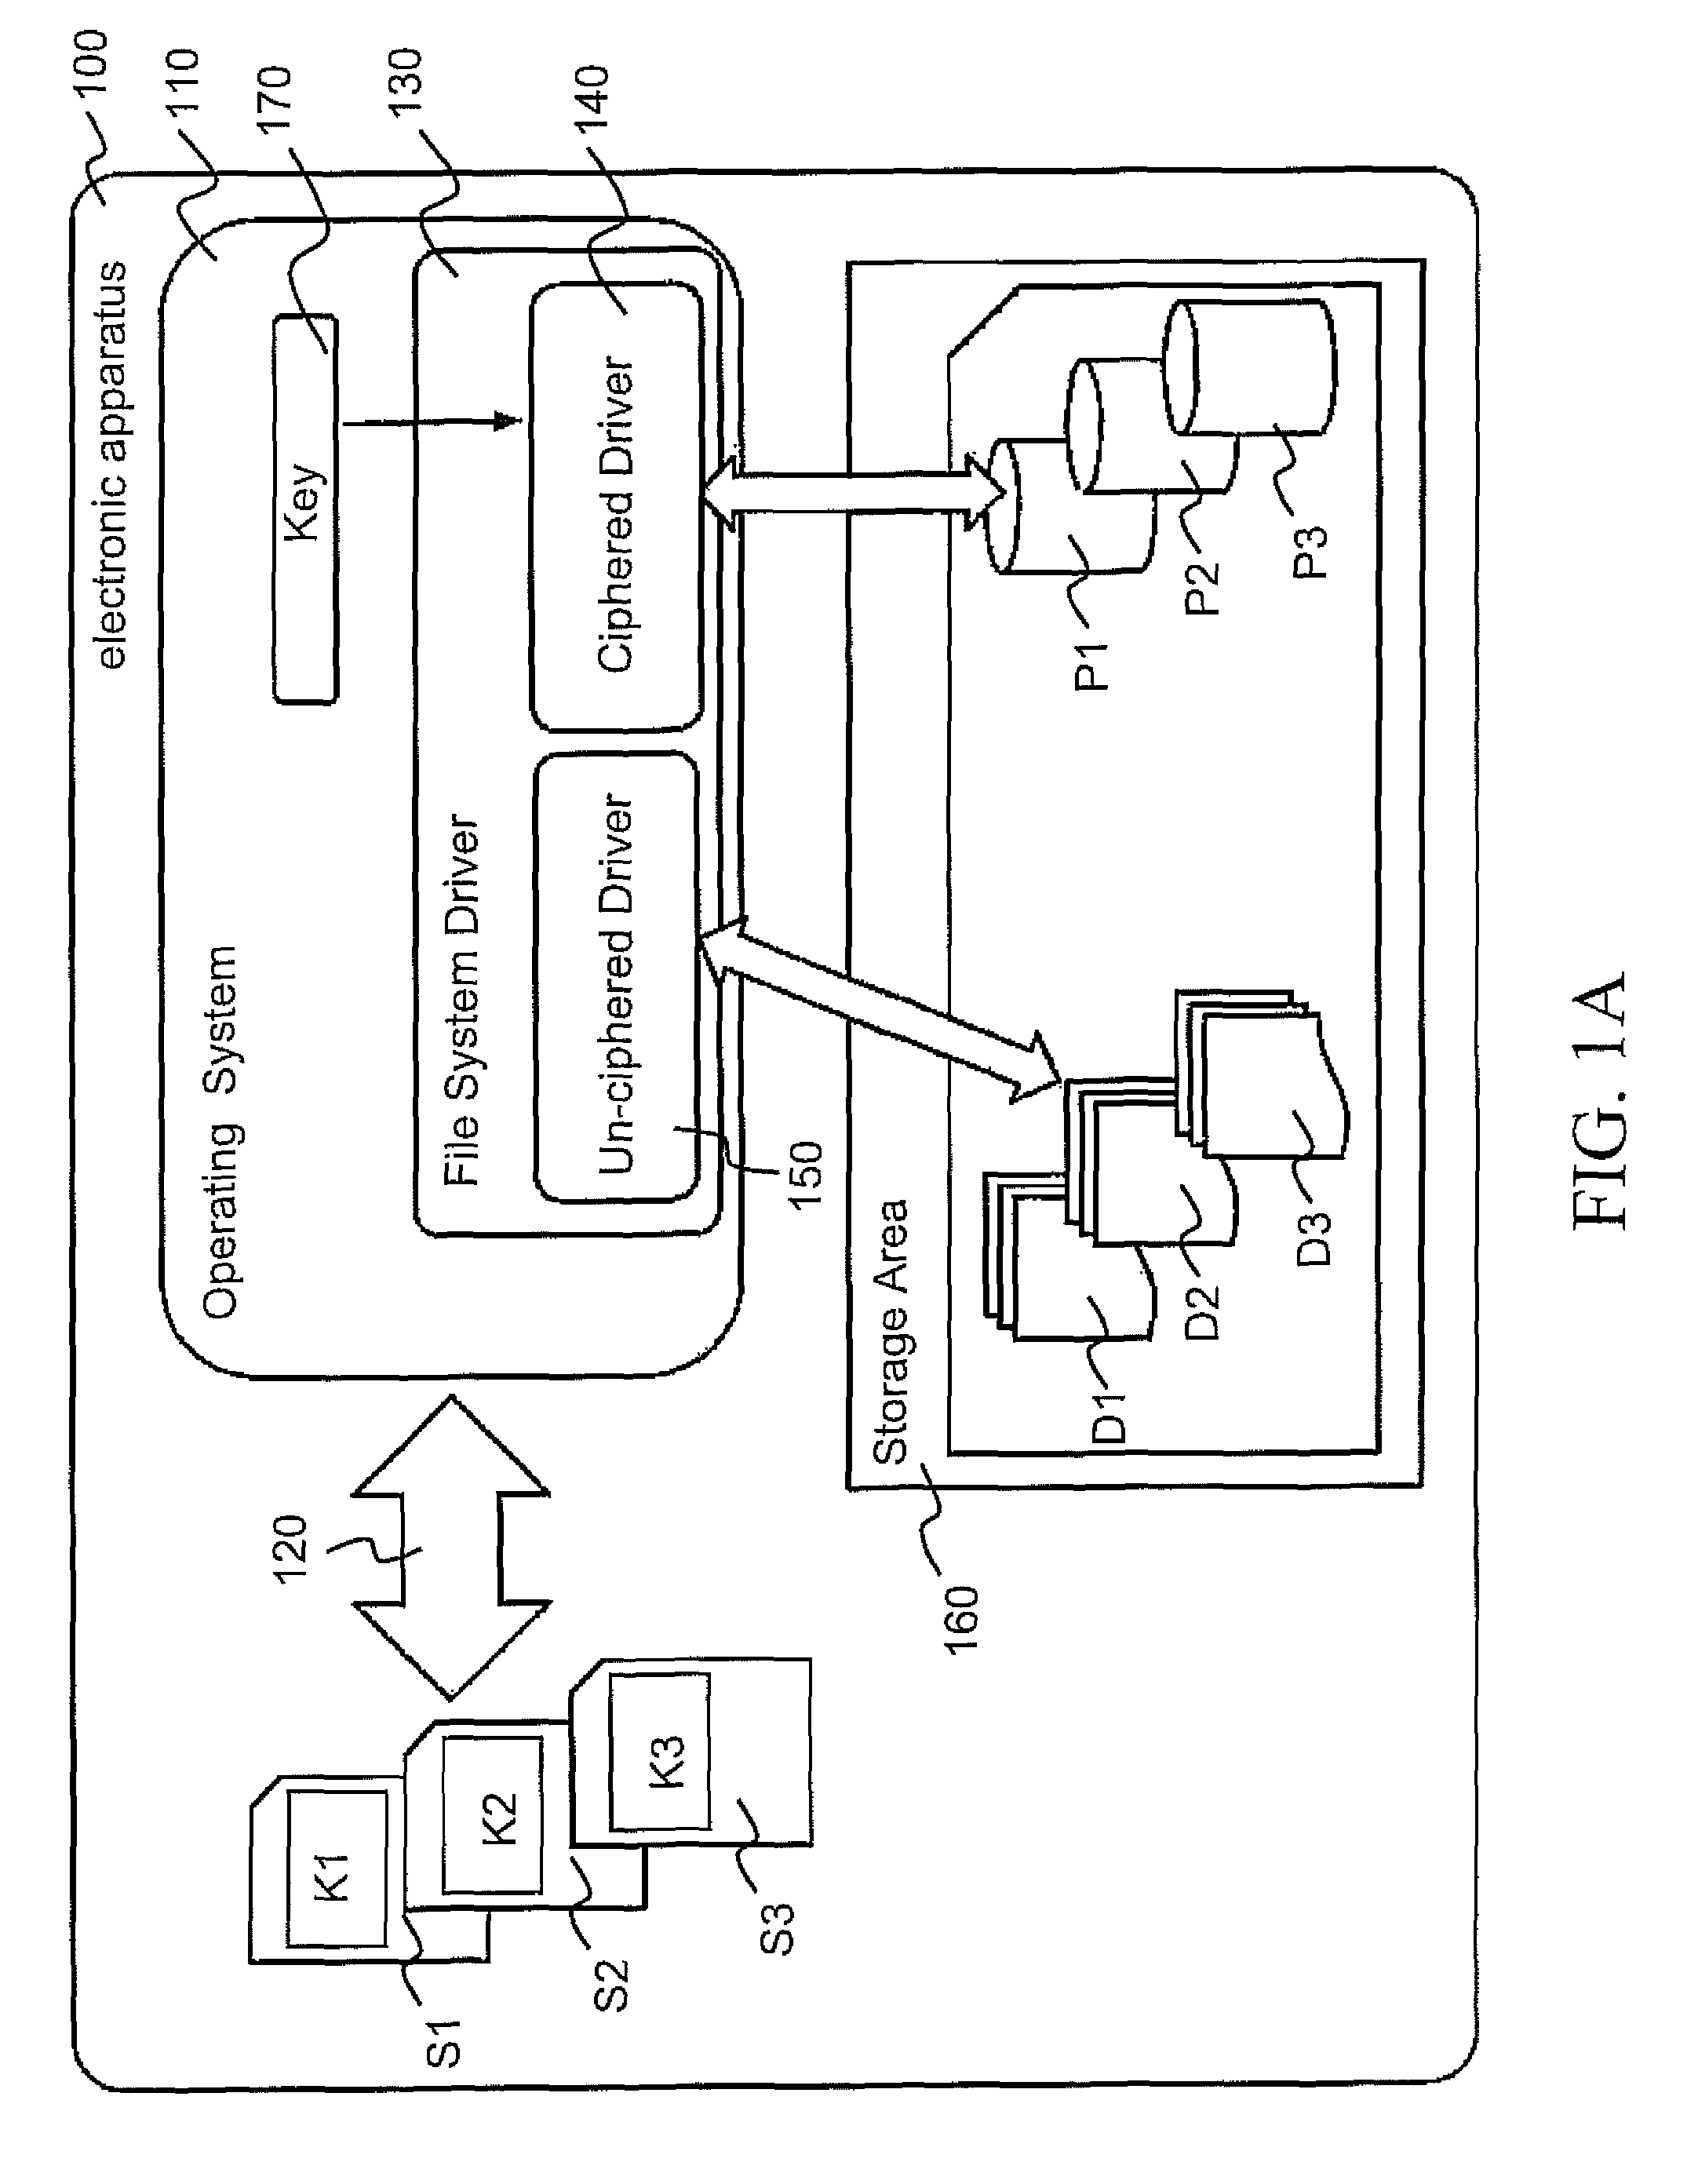 Method for different users to securely access their respective partitioned data in an electronic apparatus